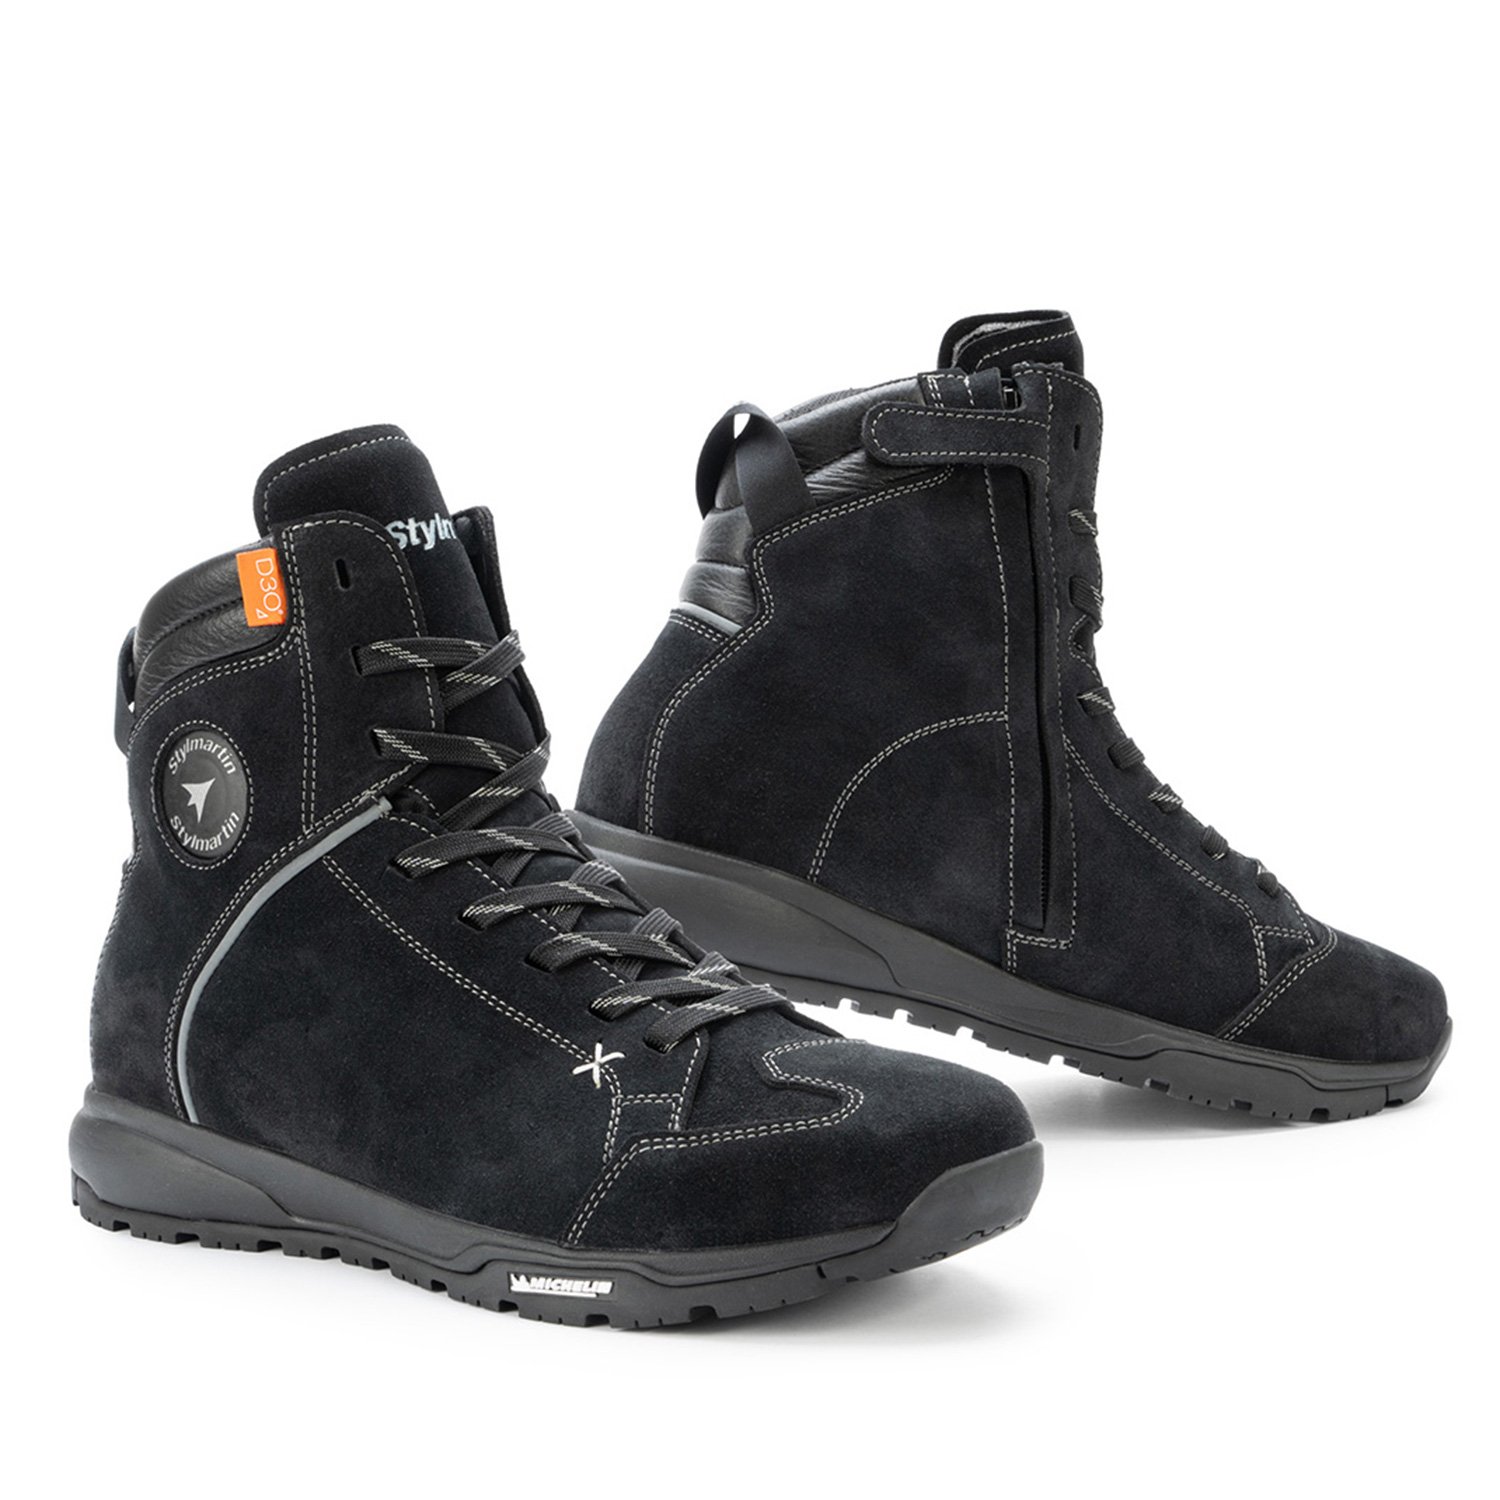 Image of Stylmartin Zed WP Sneakers Black Size 42 ID 1000001362441